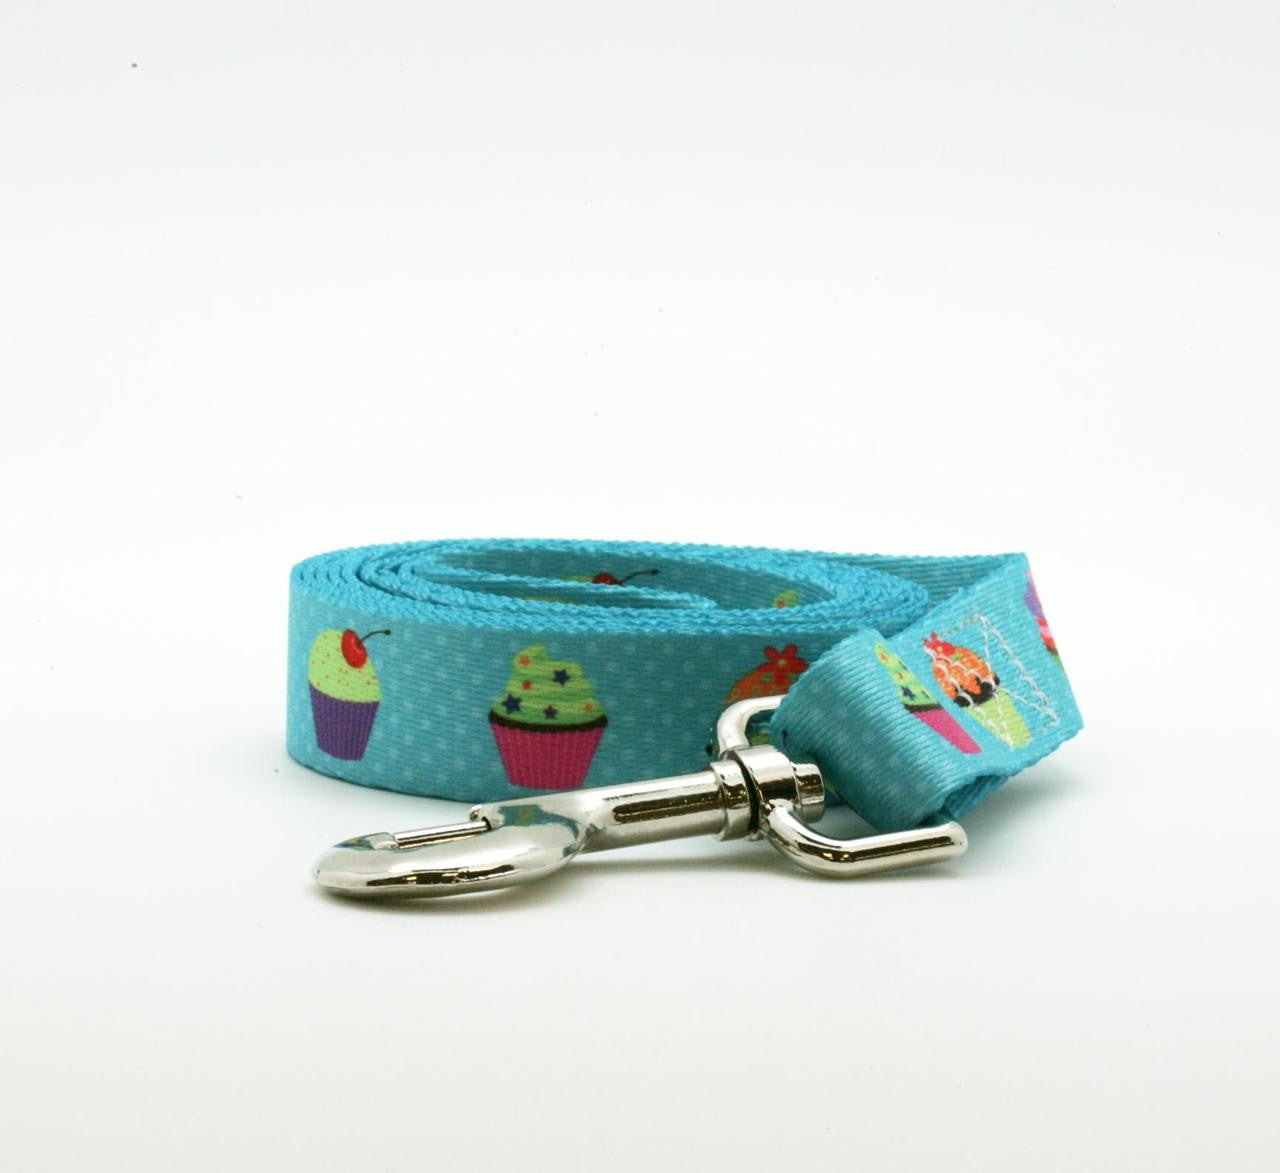 Dog Leash 1" wide with Cupcakes in a row on a Turquoise background